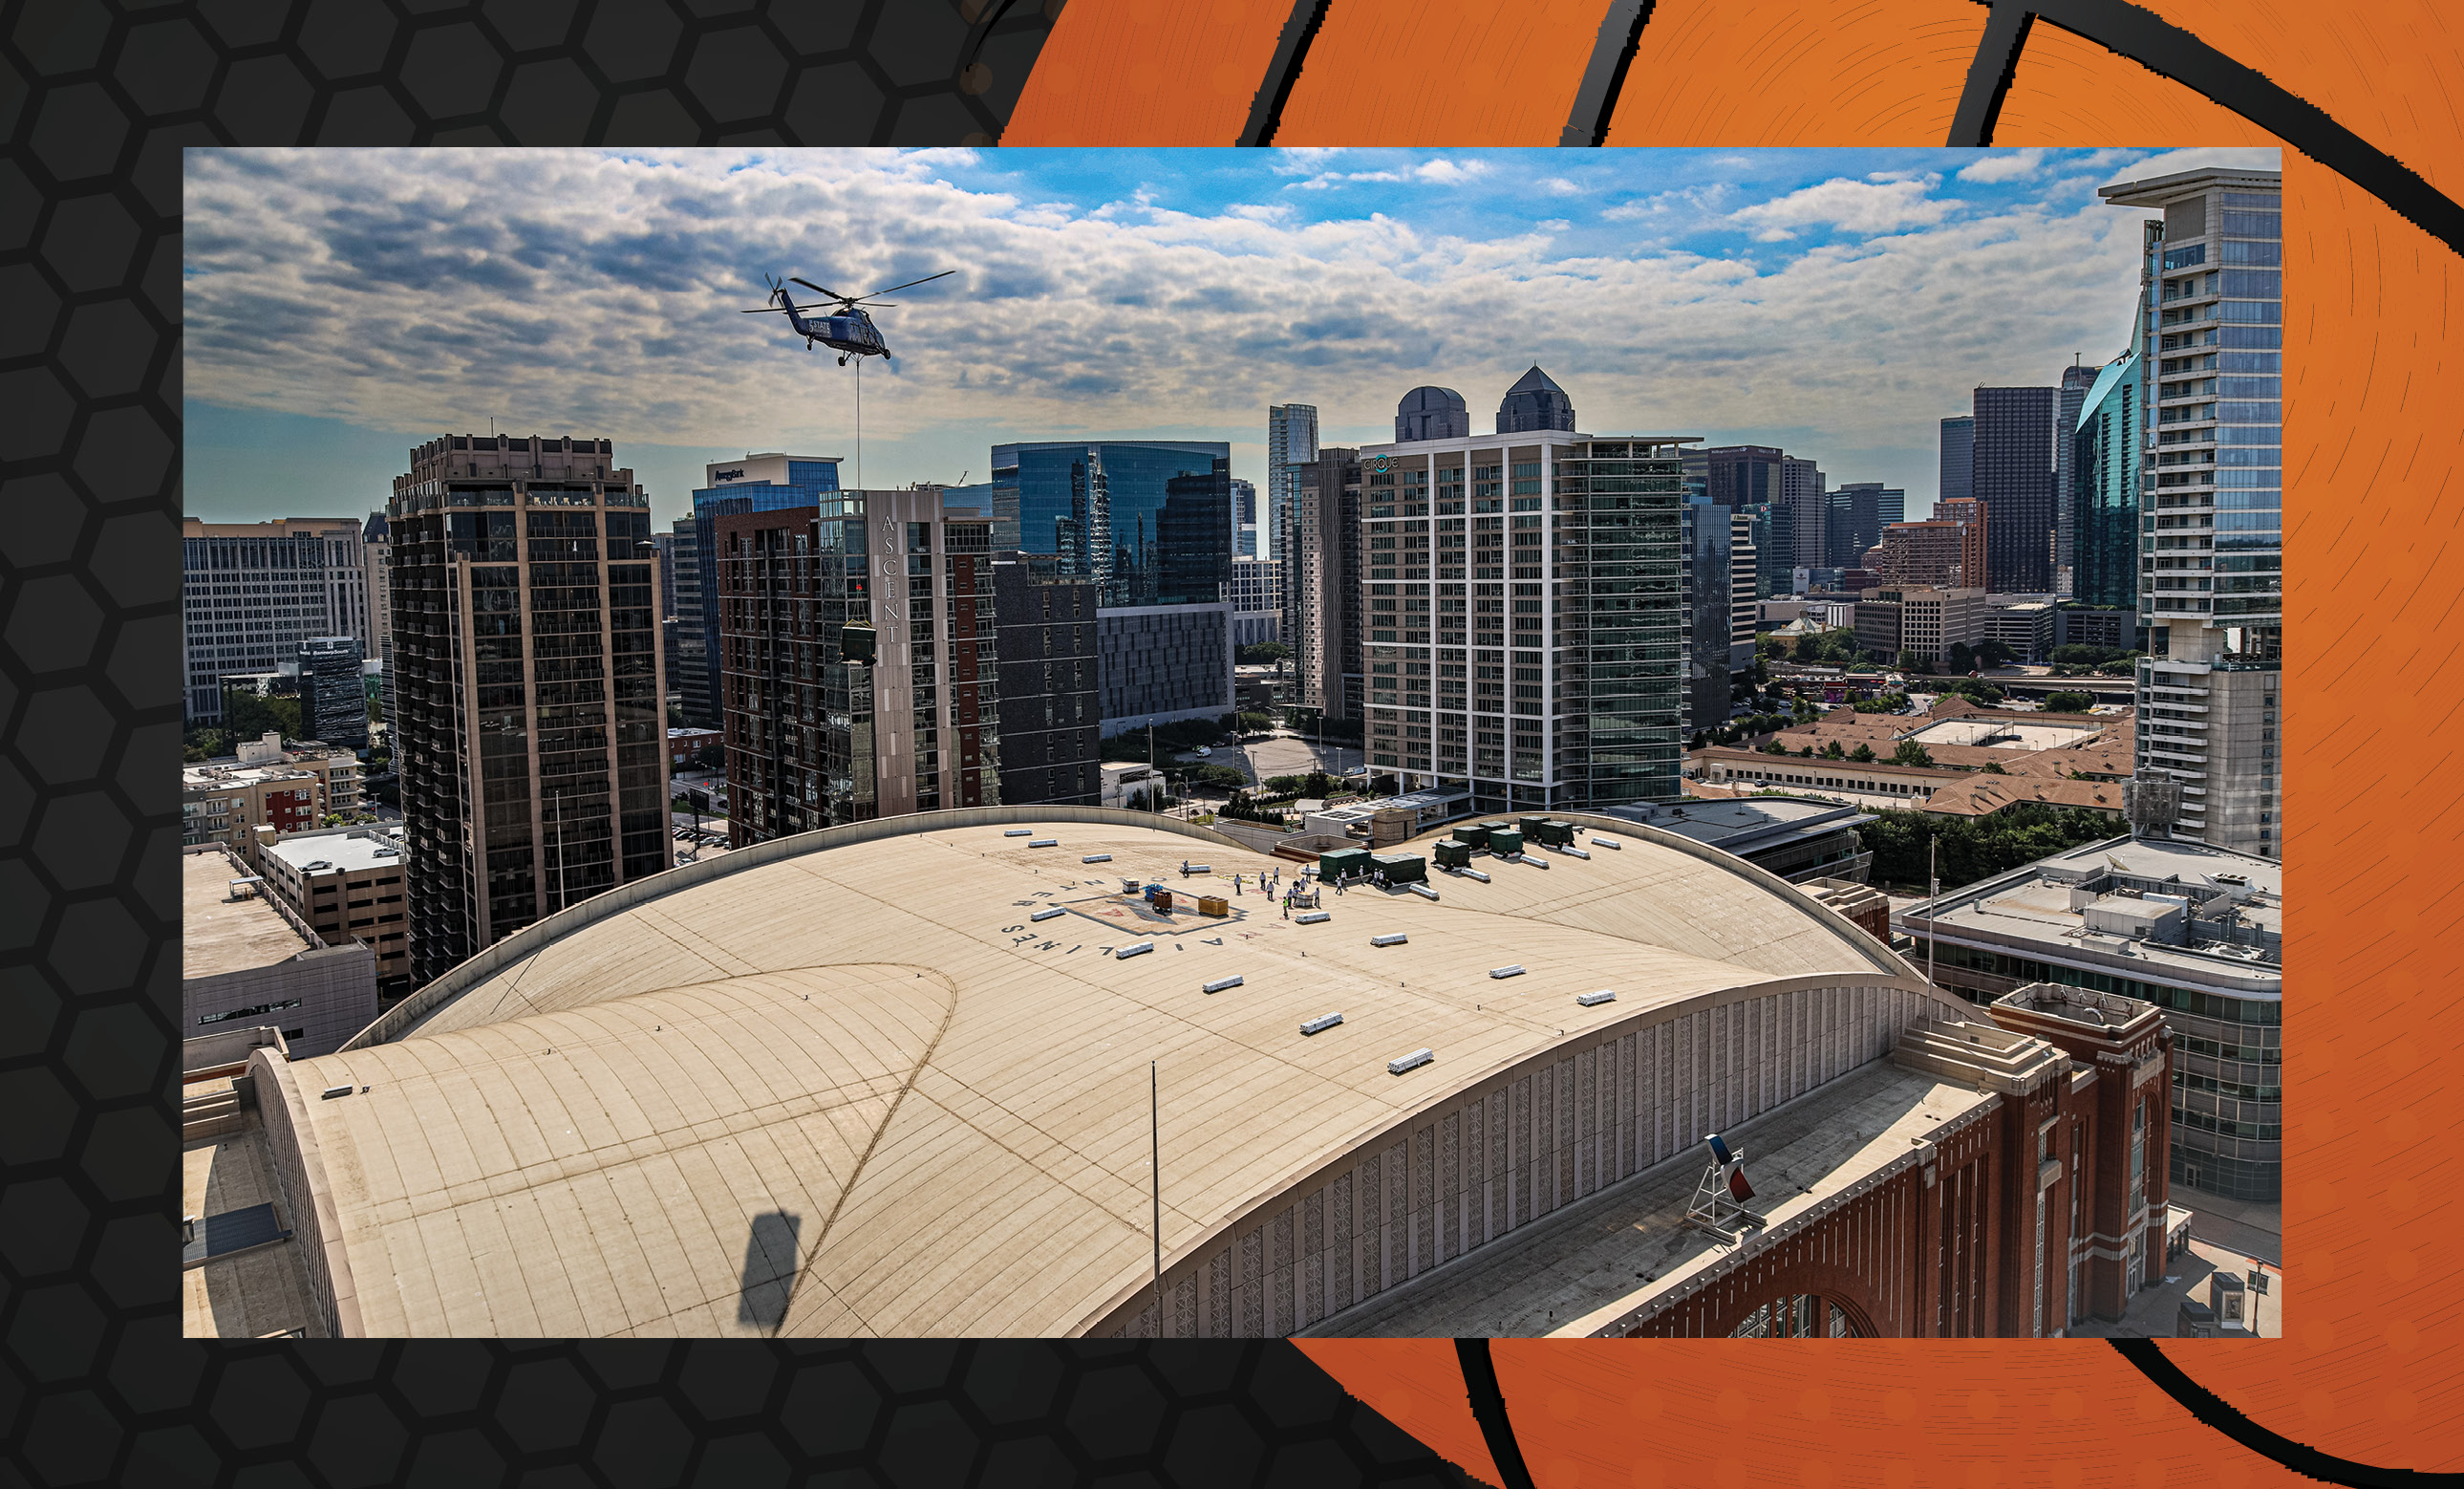 Roofing assist - KPost Company reroofs American Airlines Center in Dallas